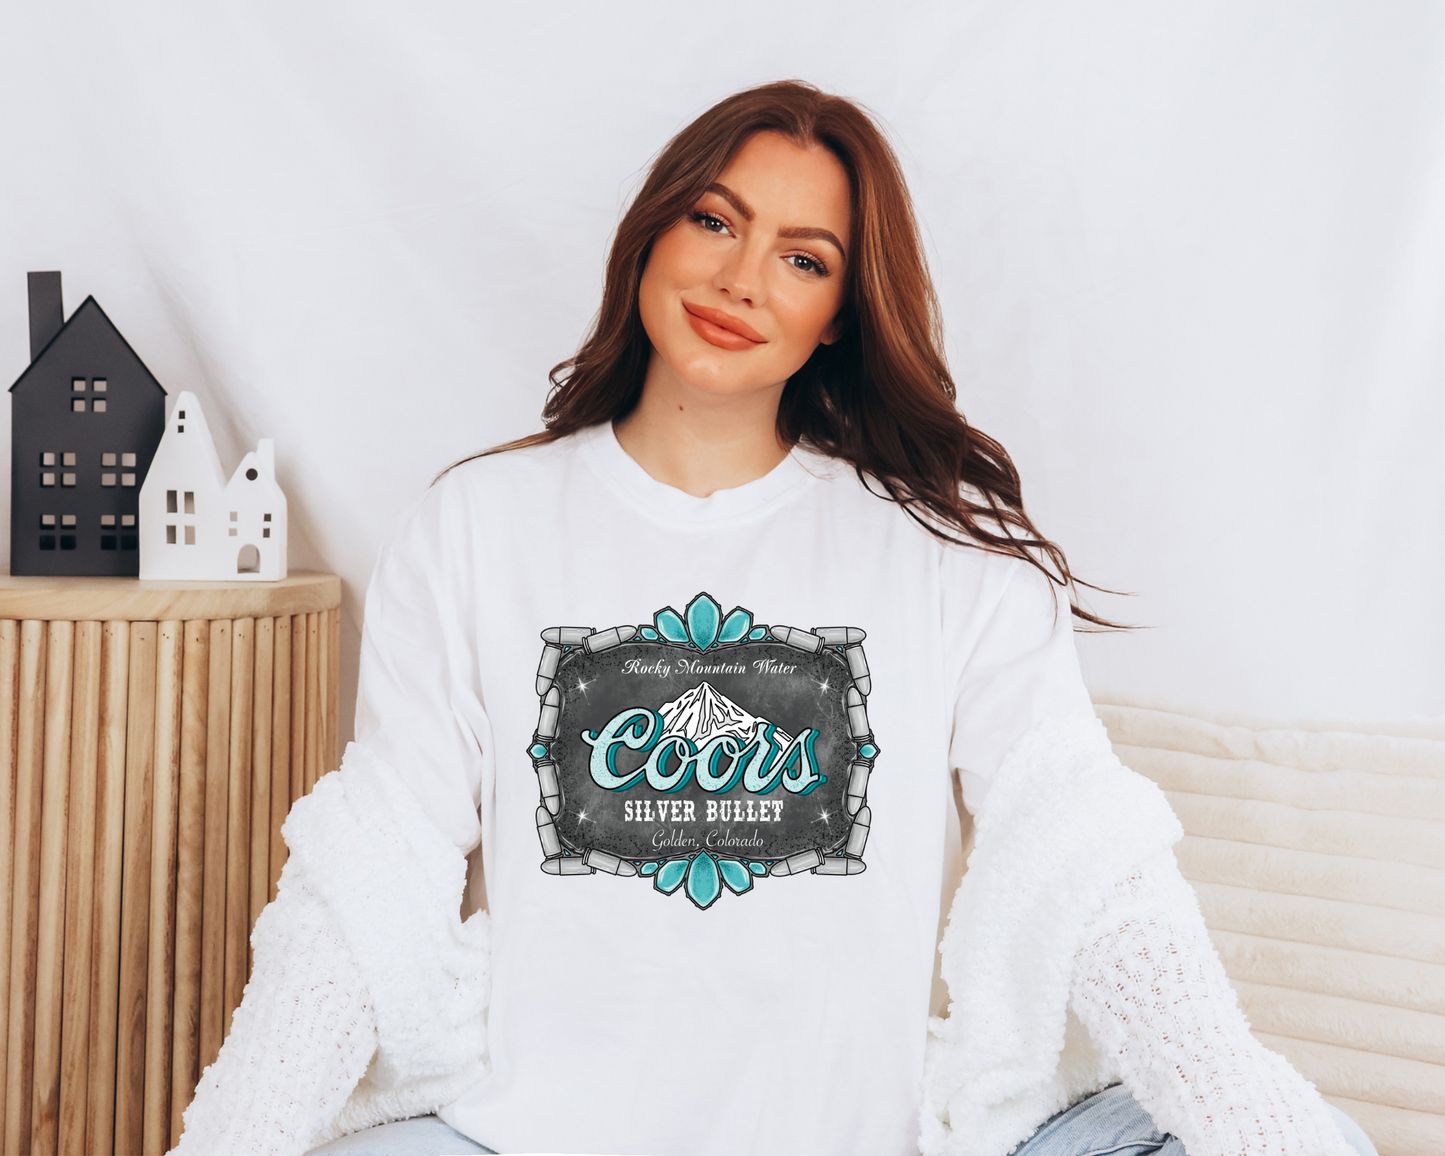 Coors Grey Silver Bullet Graphic Top